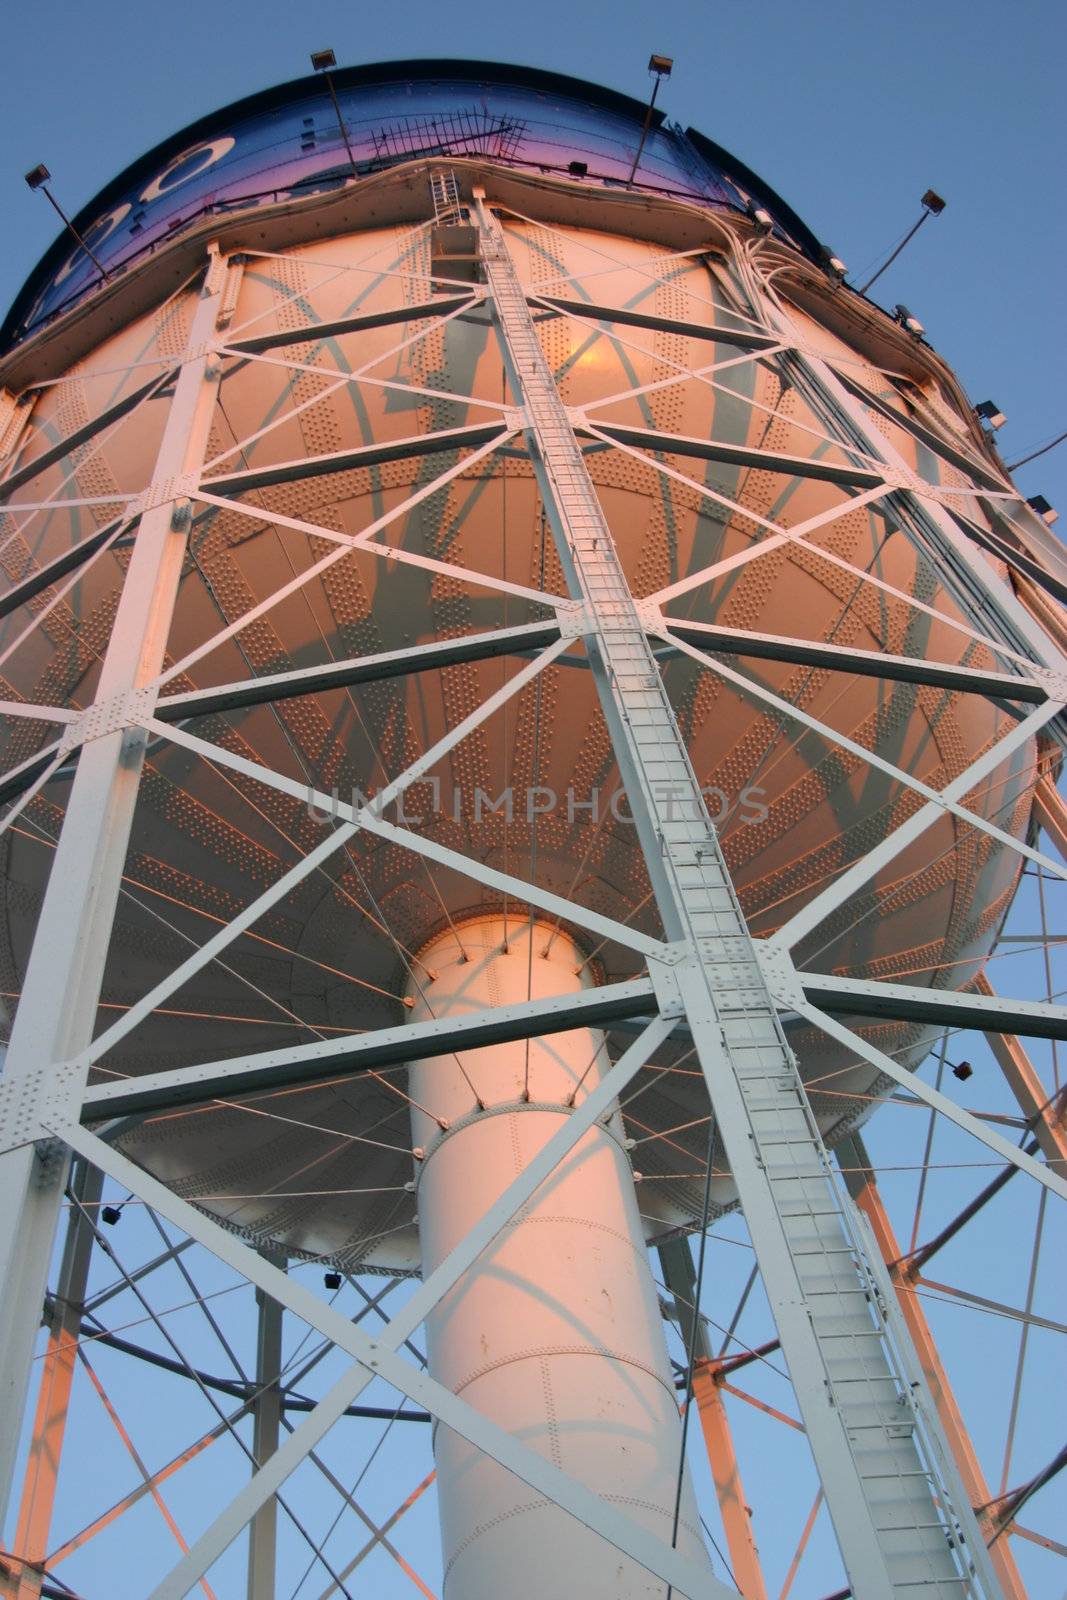 This is an up view of the Detroit Zoo water tower viewing its undercarriage and construction.